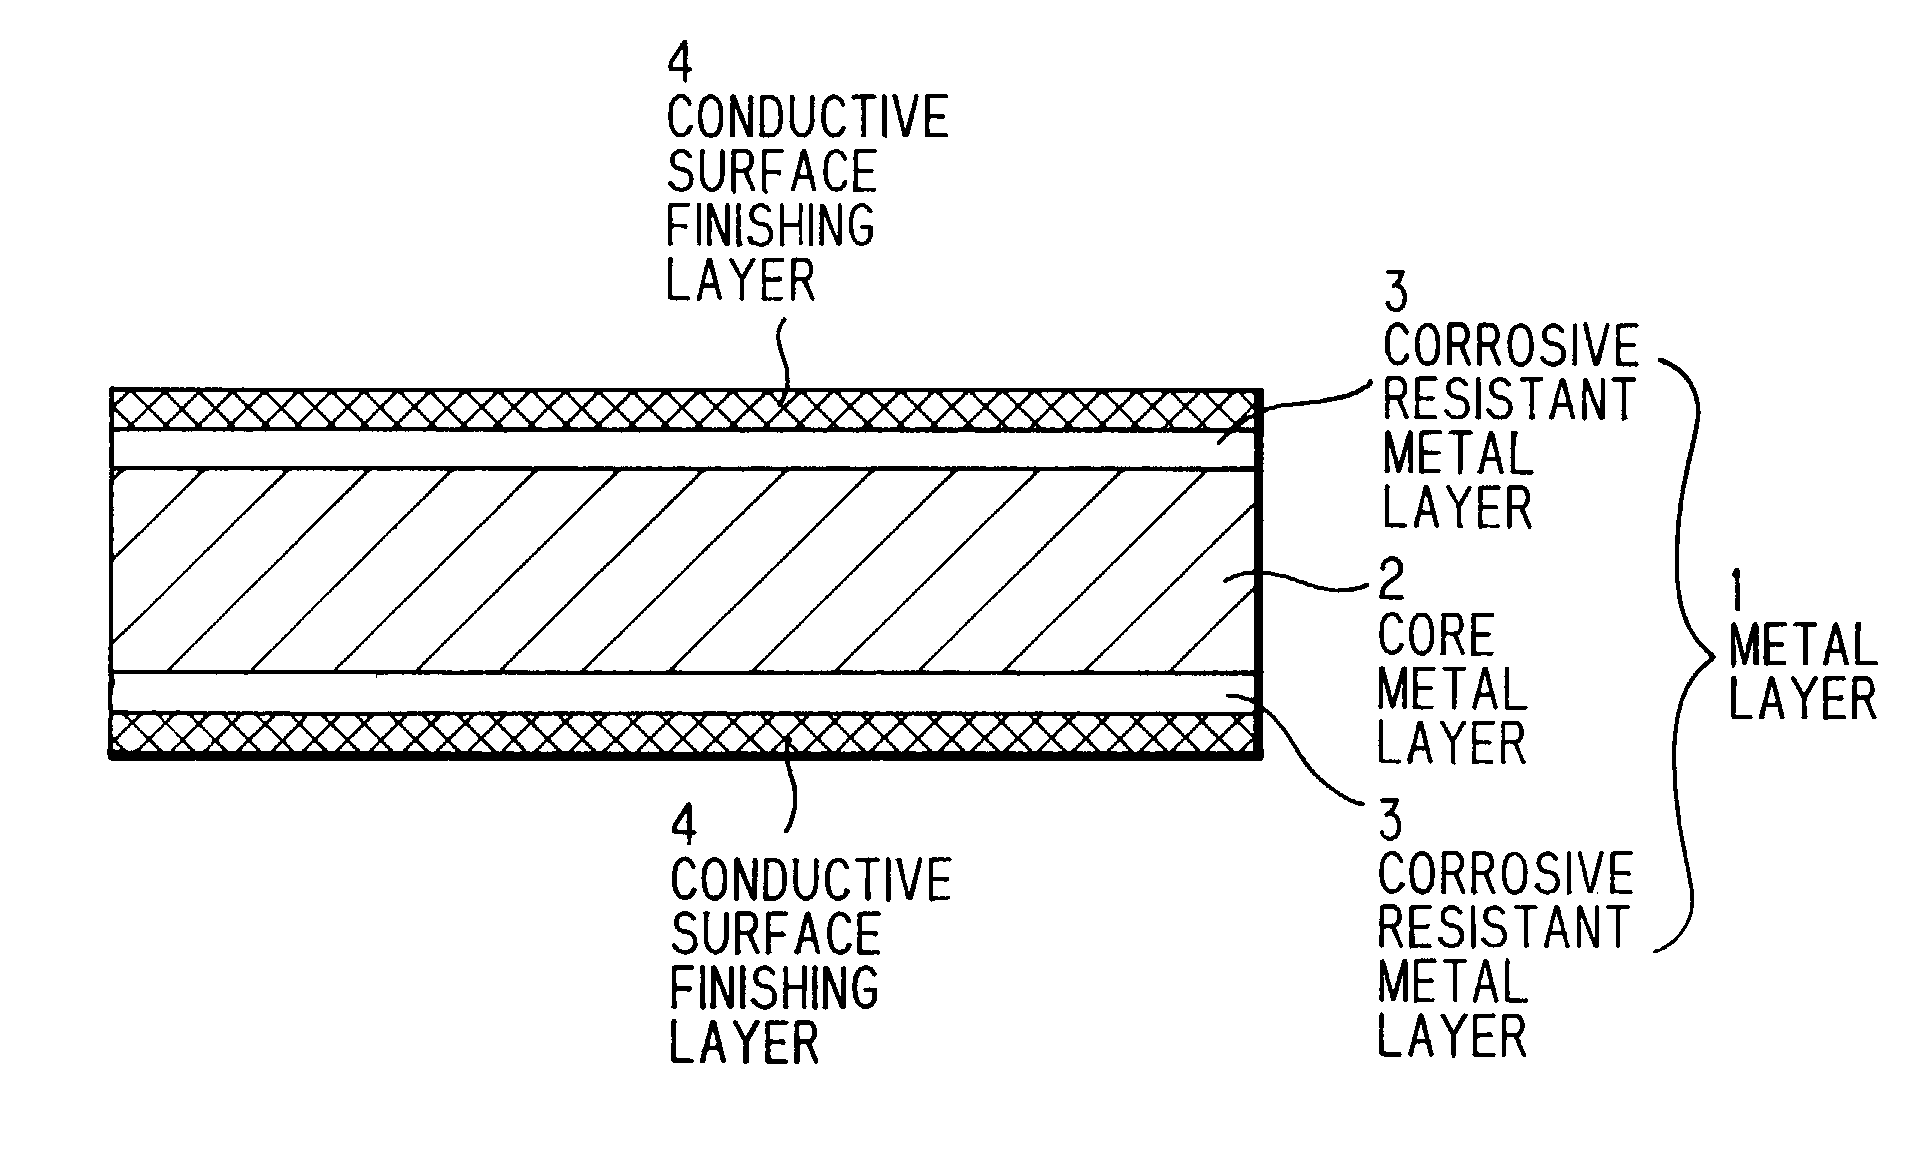 Corrosive resistant metal material covered with conductive substance